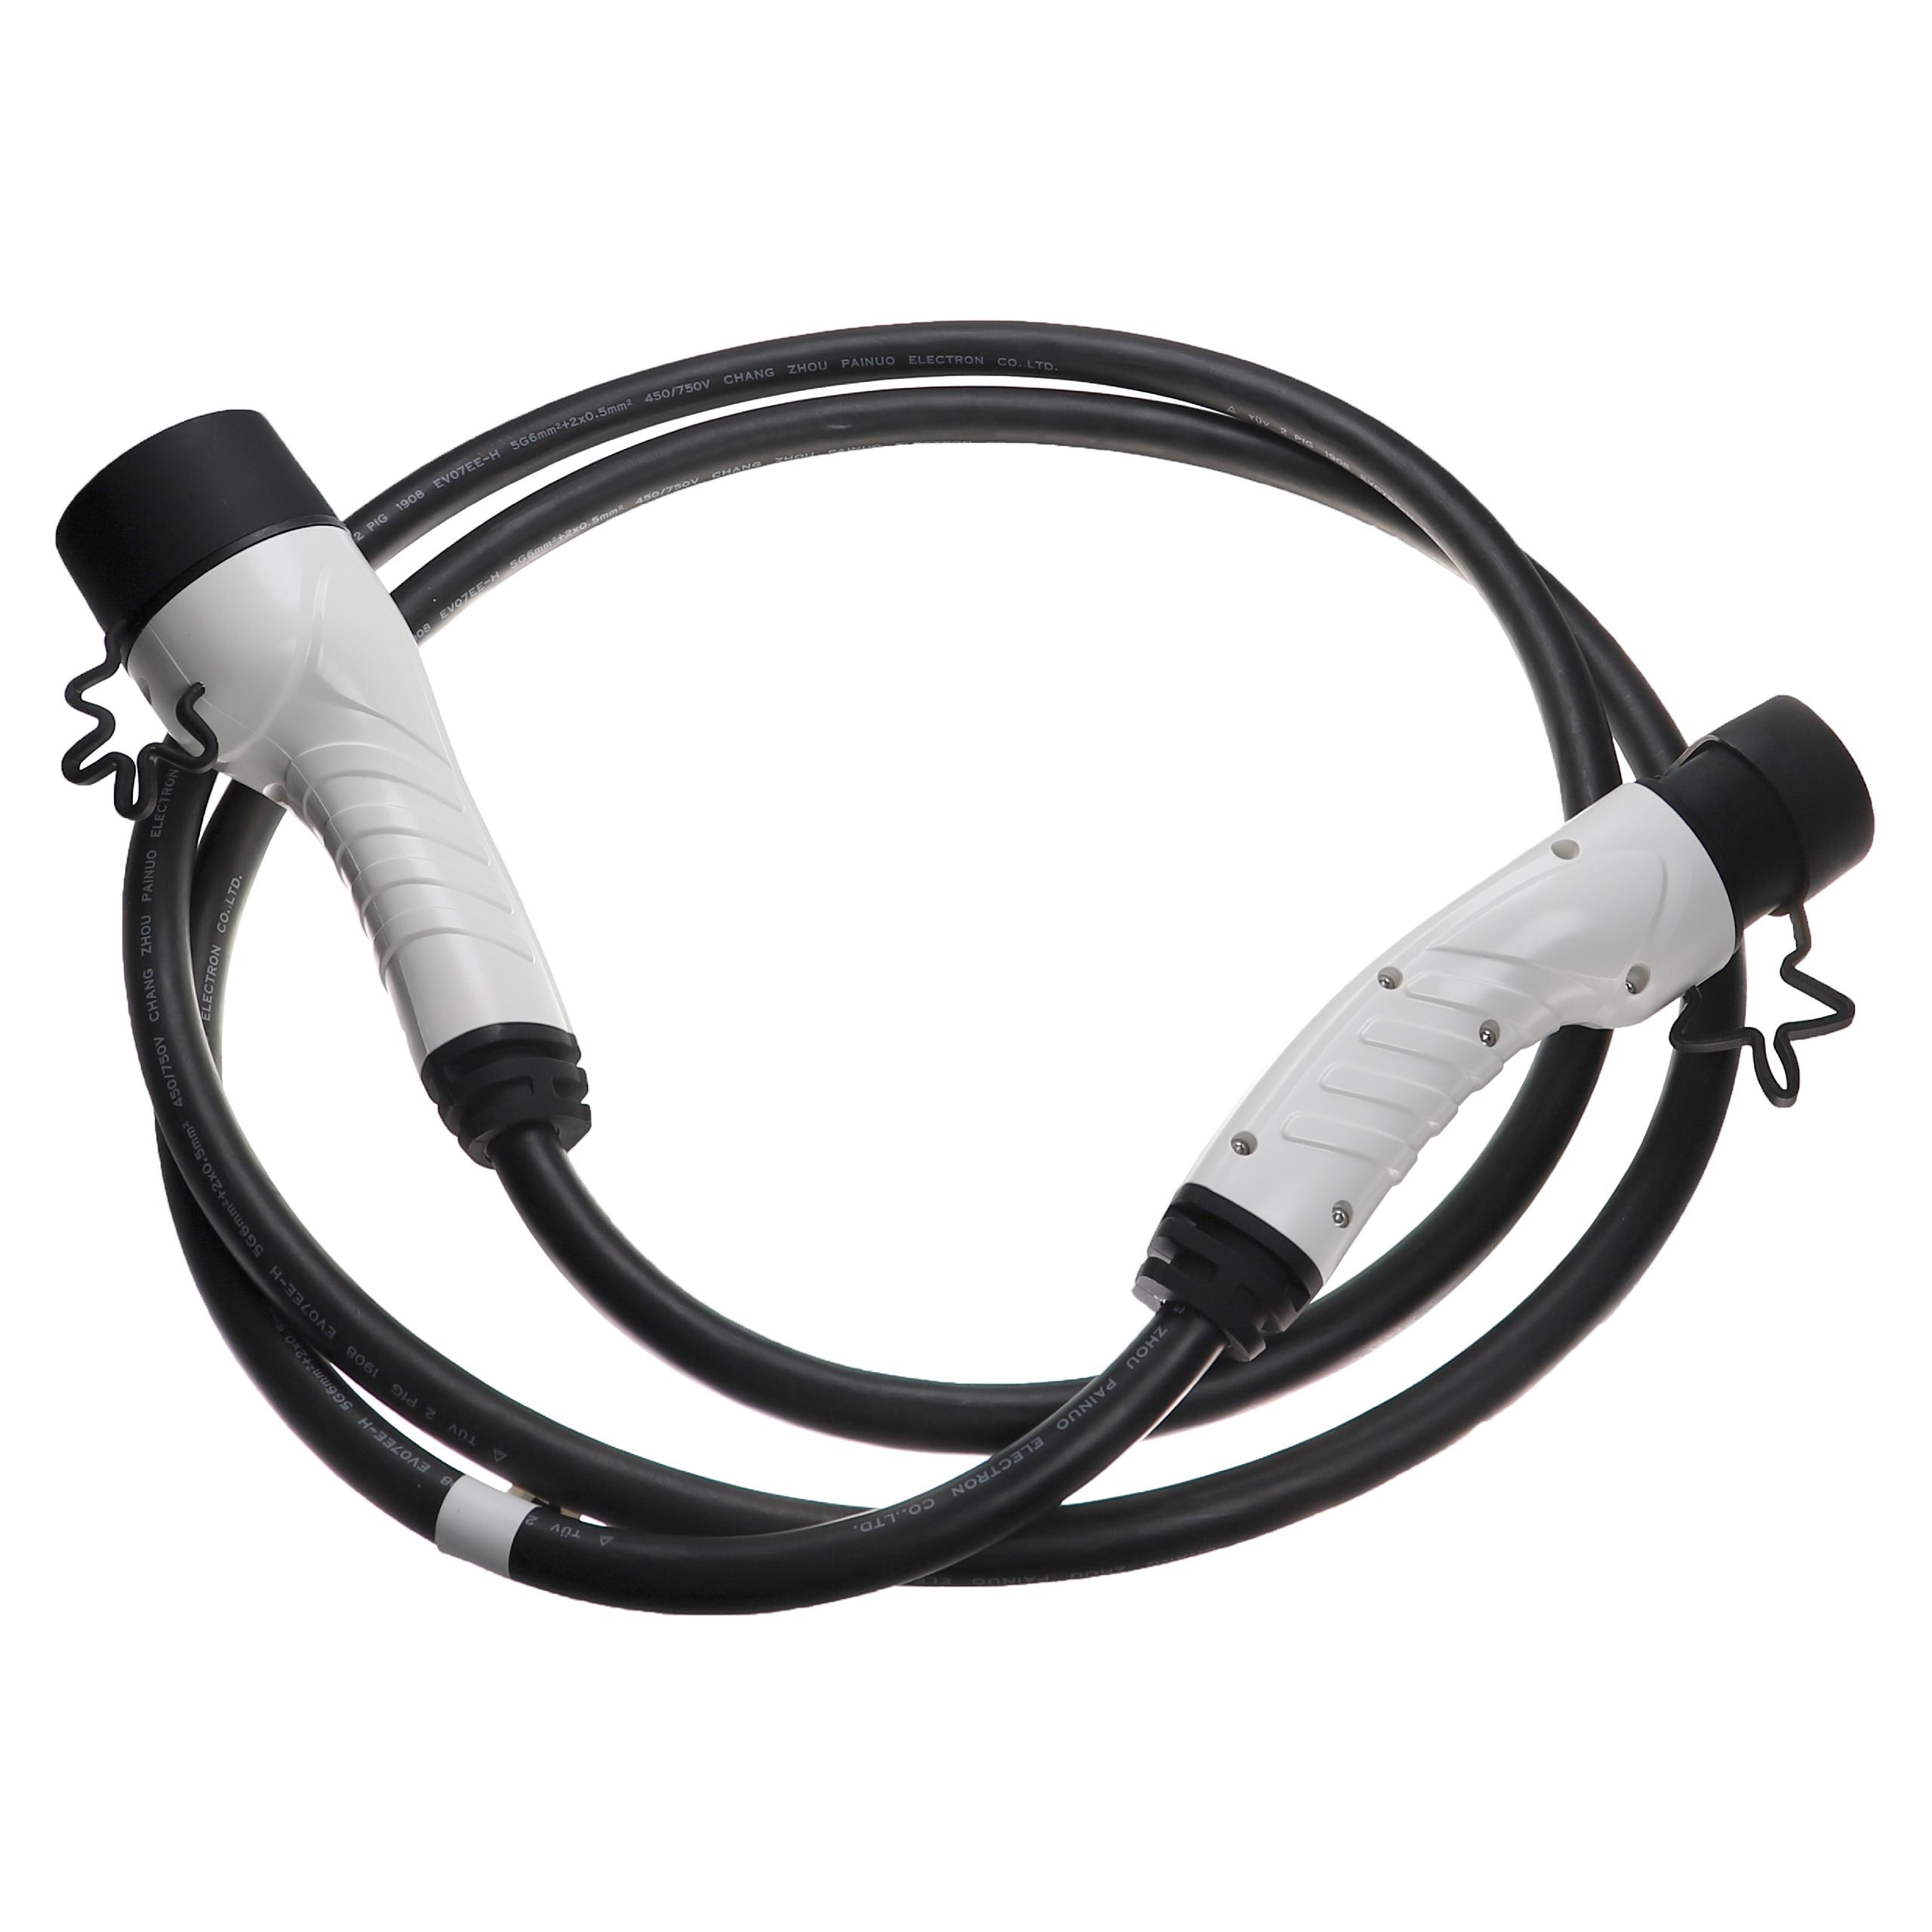 Charging Cable for Electric Car, Plug-In Hybrid - Type 2 to Type 2 Cable, 3-phase, 32 A, 22 kW, 3 m